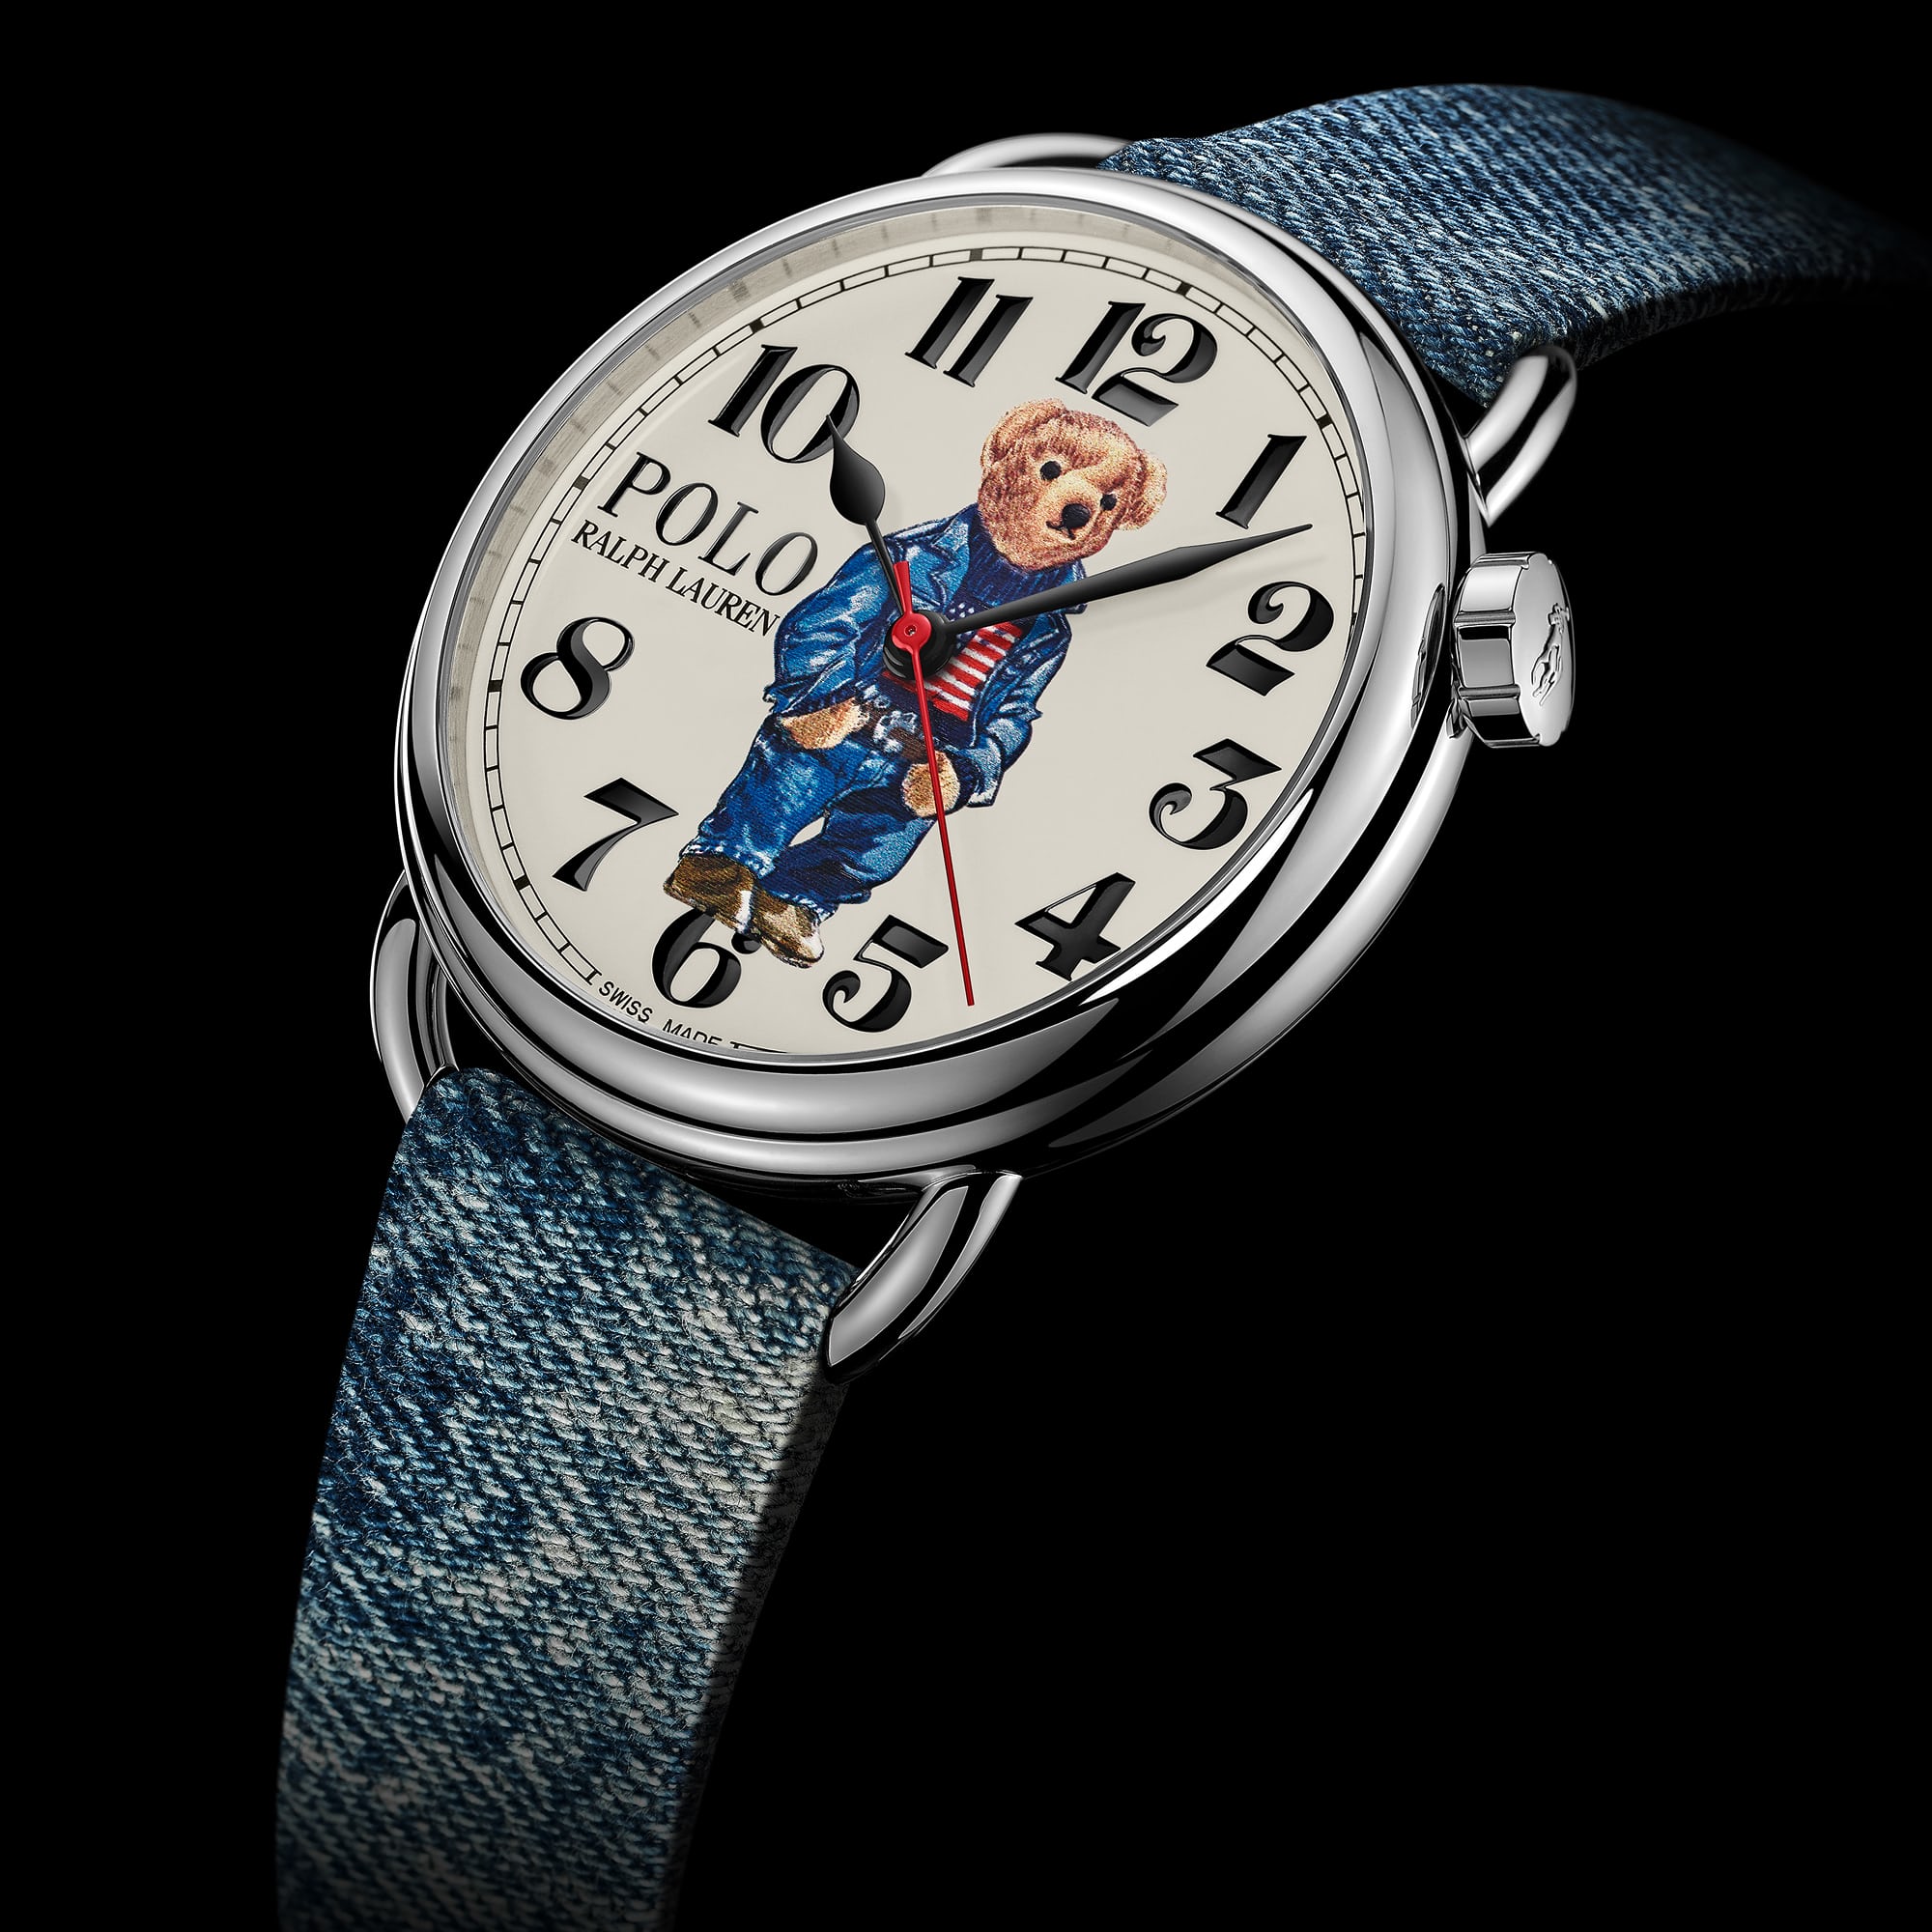 A LOOK AT RALPH LAUREN'S PERSONAL WATCH COLLECTION – APPARATUS